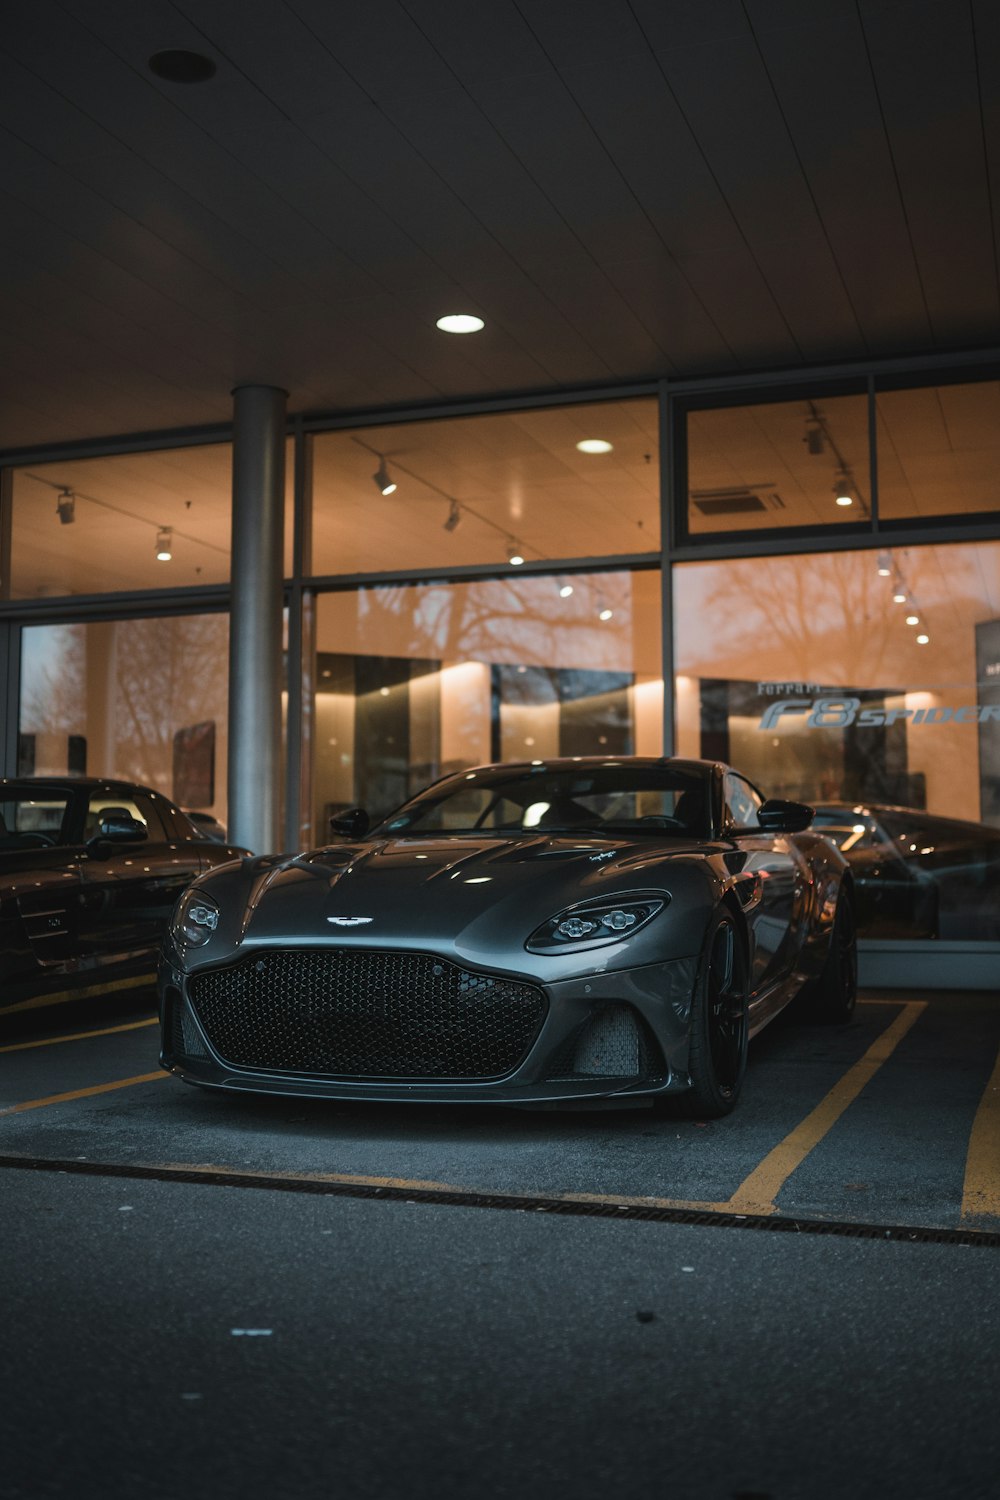 Aston Martin Pictures Download Free Images On Unsplash